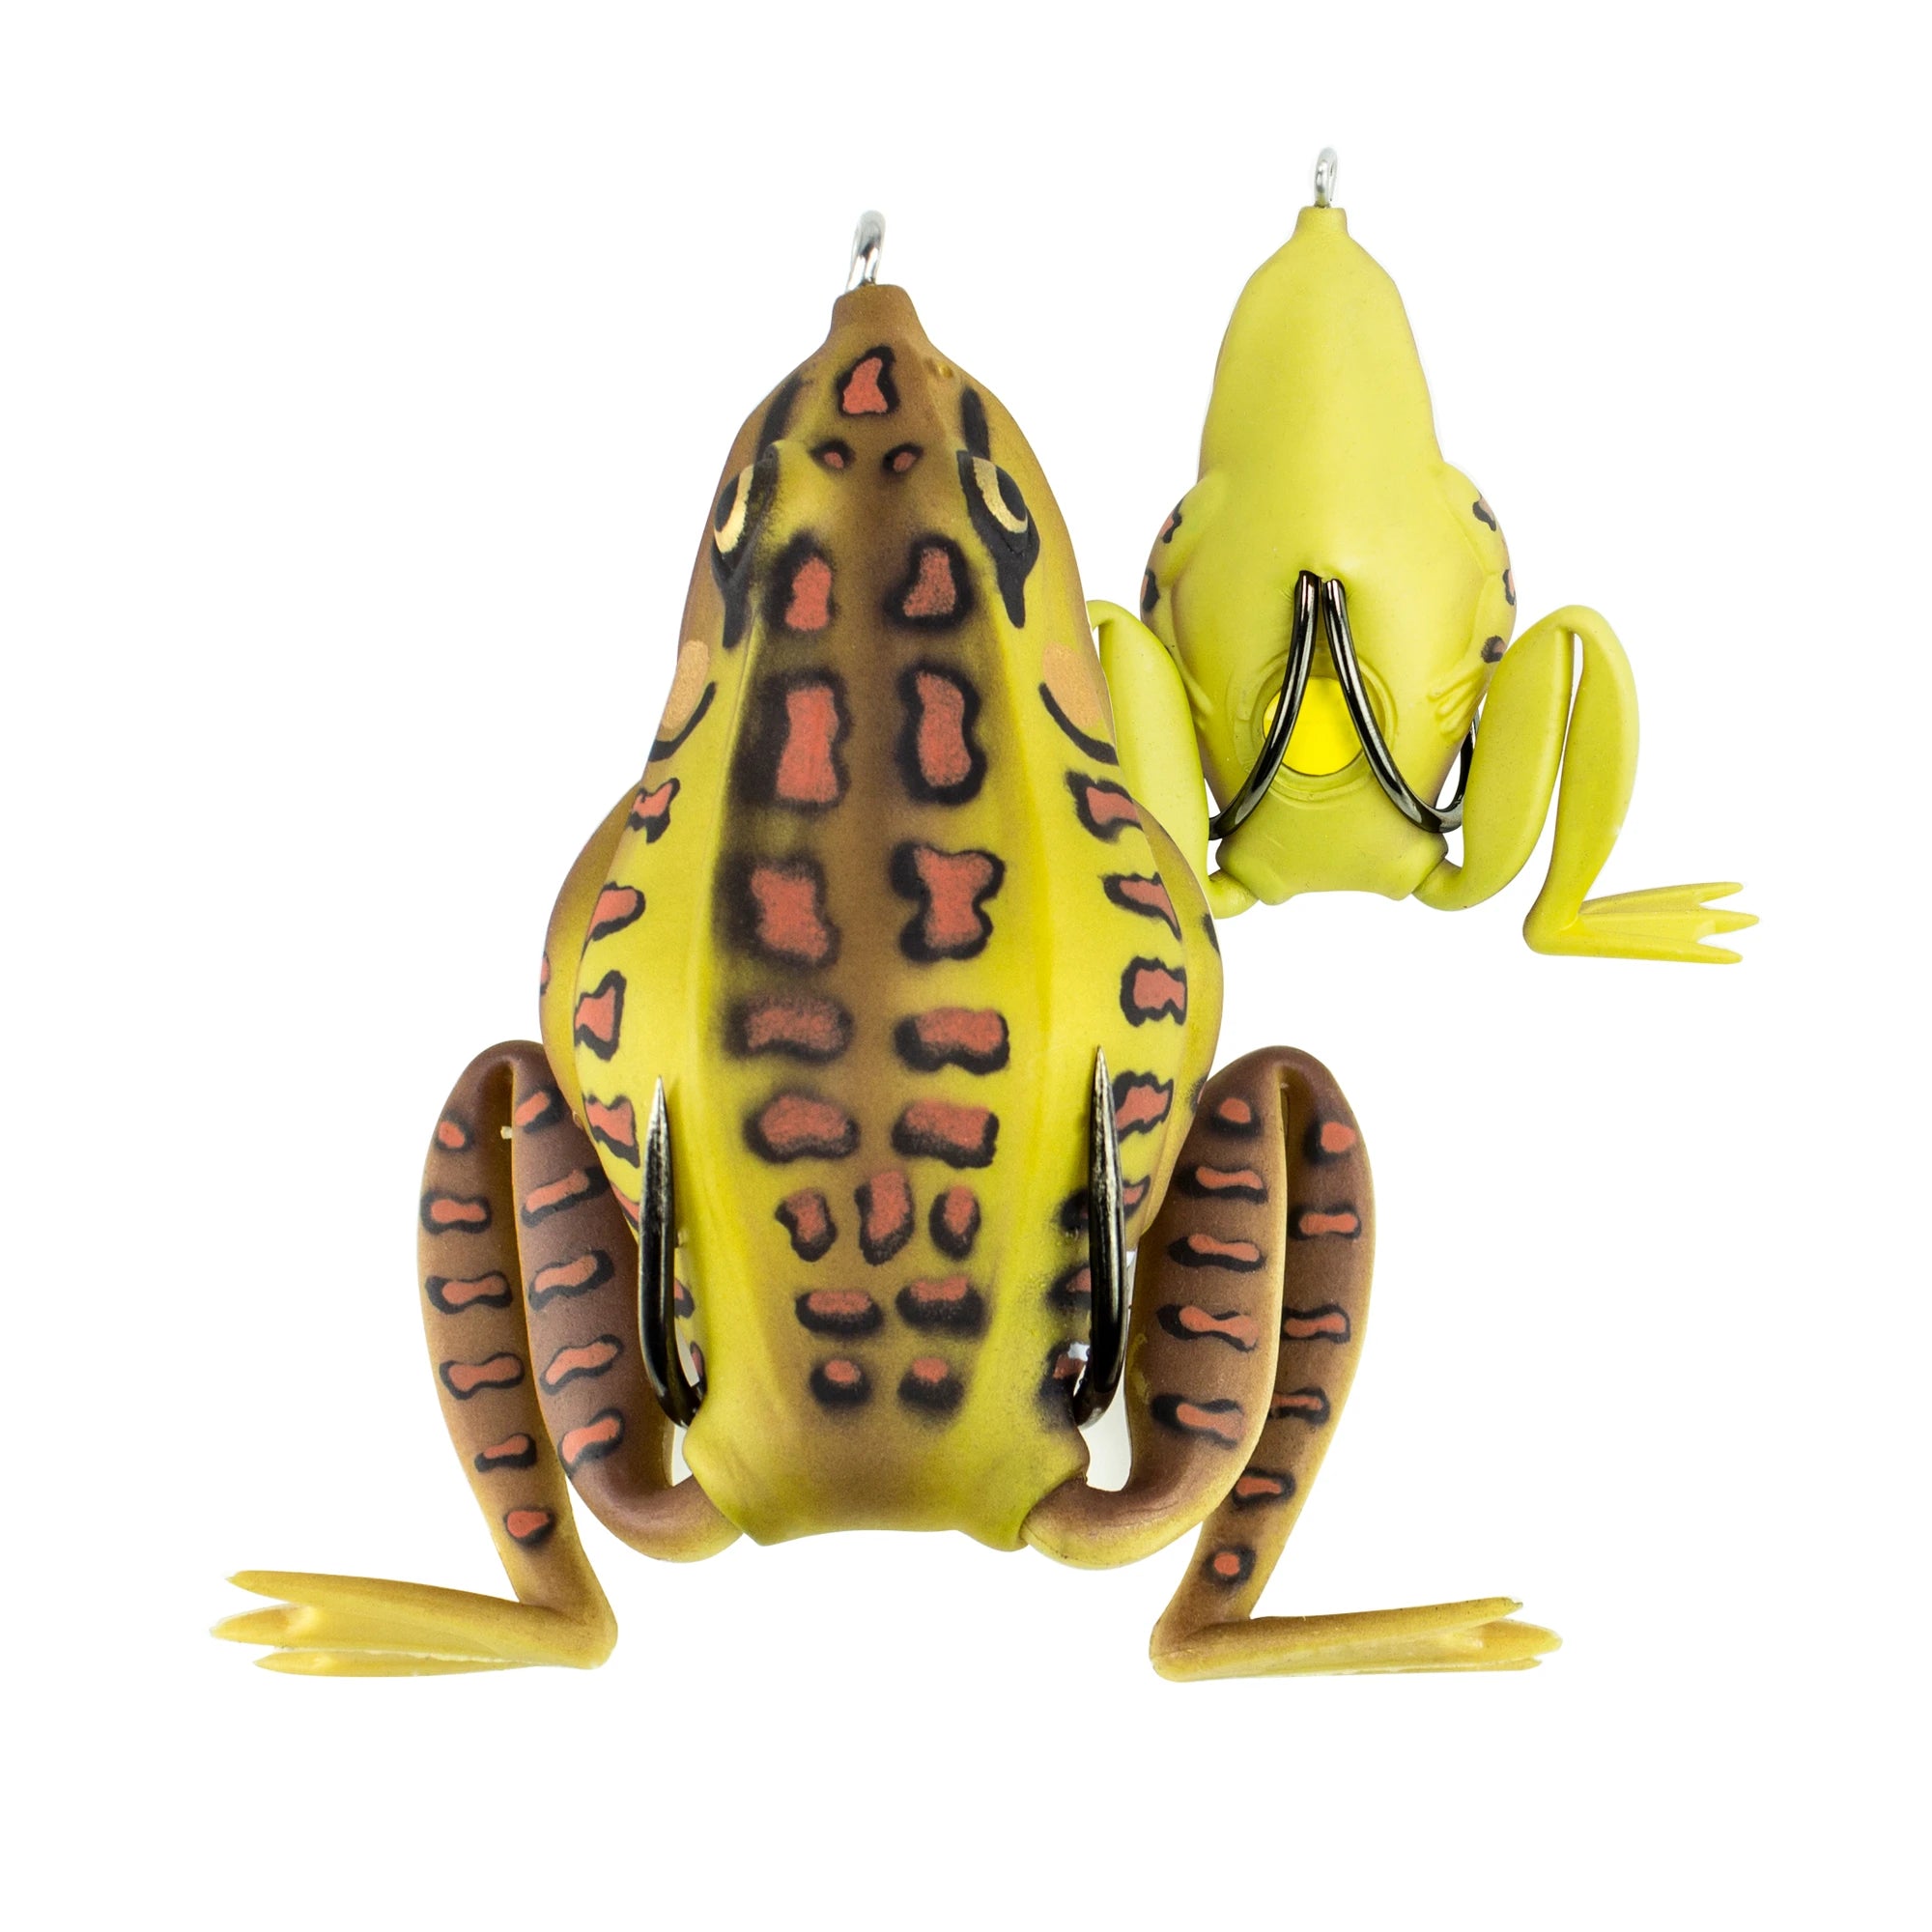 Lunkerhunt Combat Frog 2 1/2 inch Hollow Body Frog — Discount Tackle